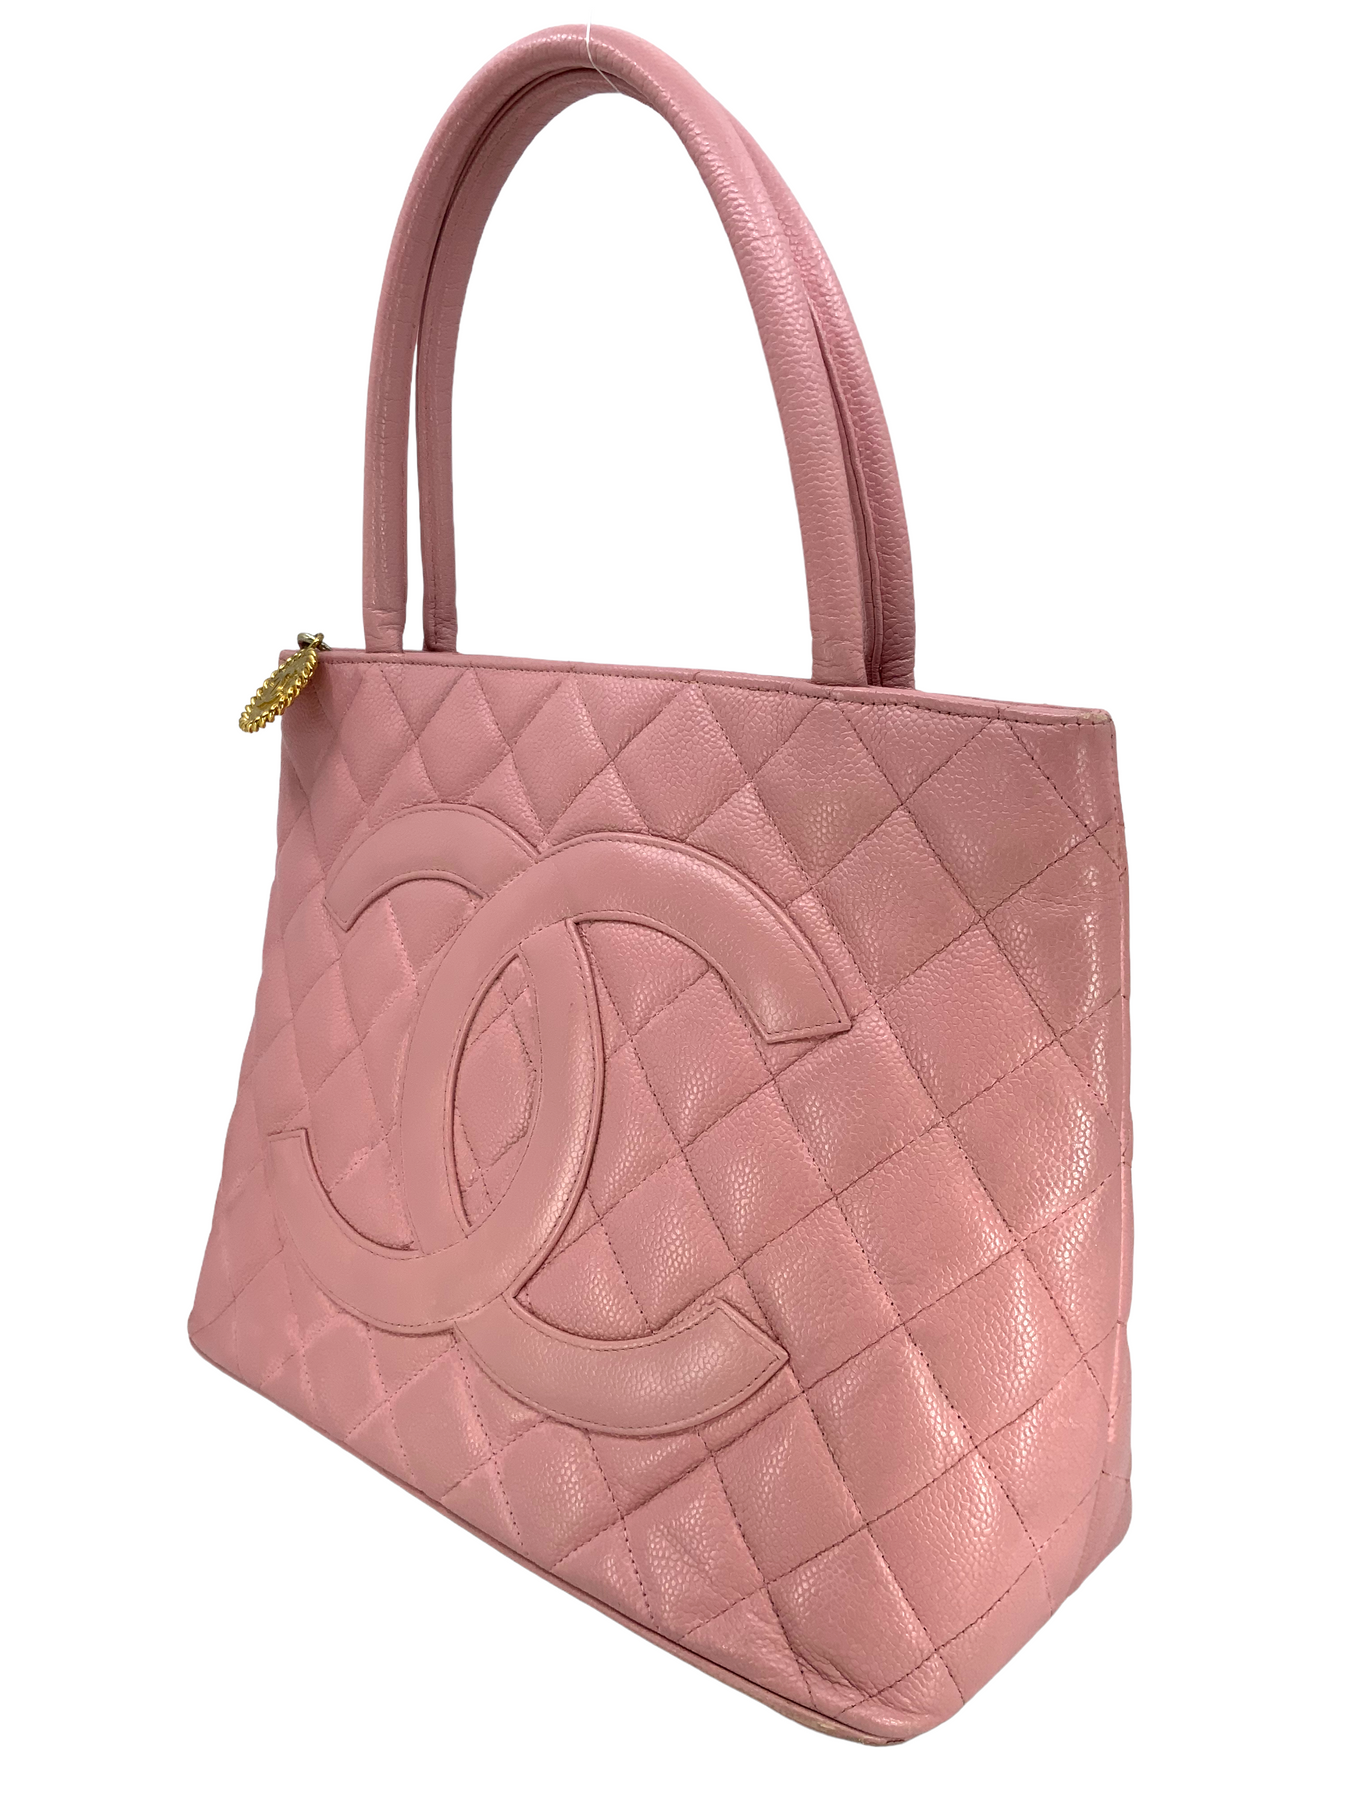 Chanel Quilted Caviar Tote Bag - Consigned Designs